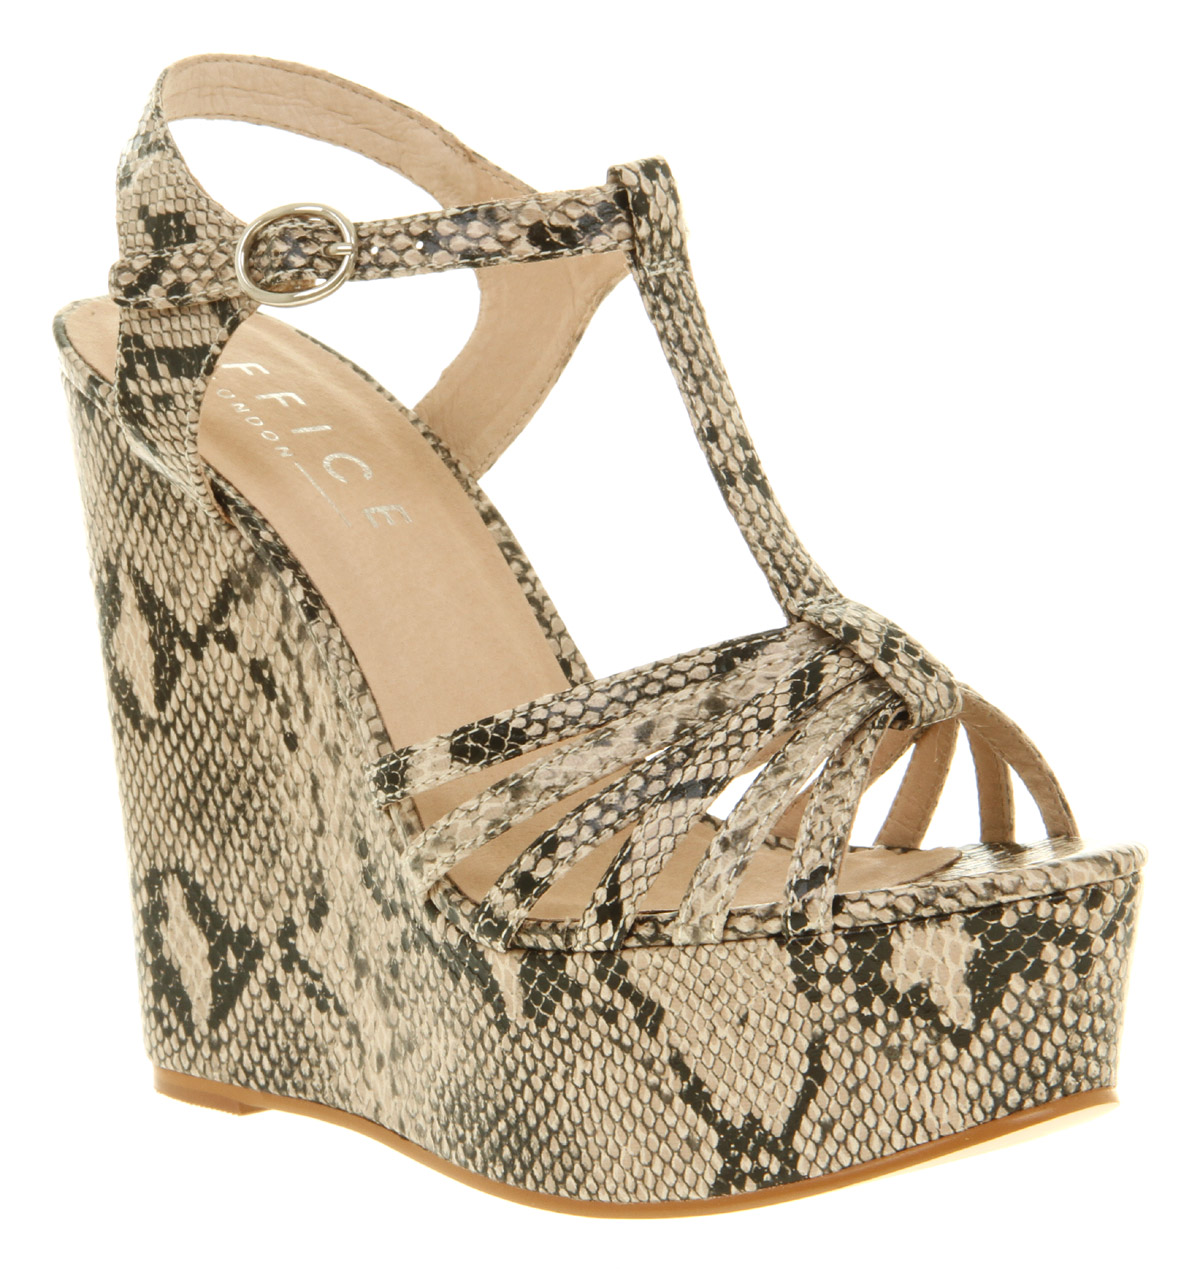 Fashion Footnote: Just.bought: Snakeskin Wedges